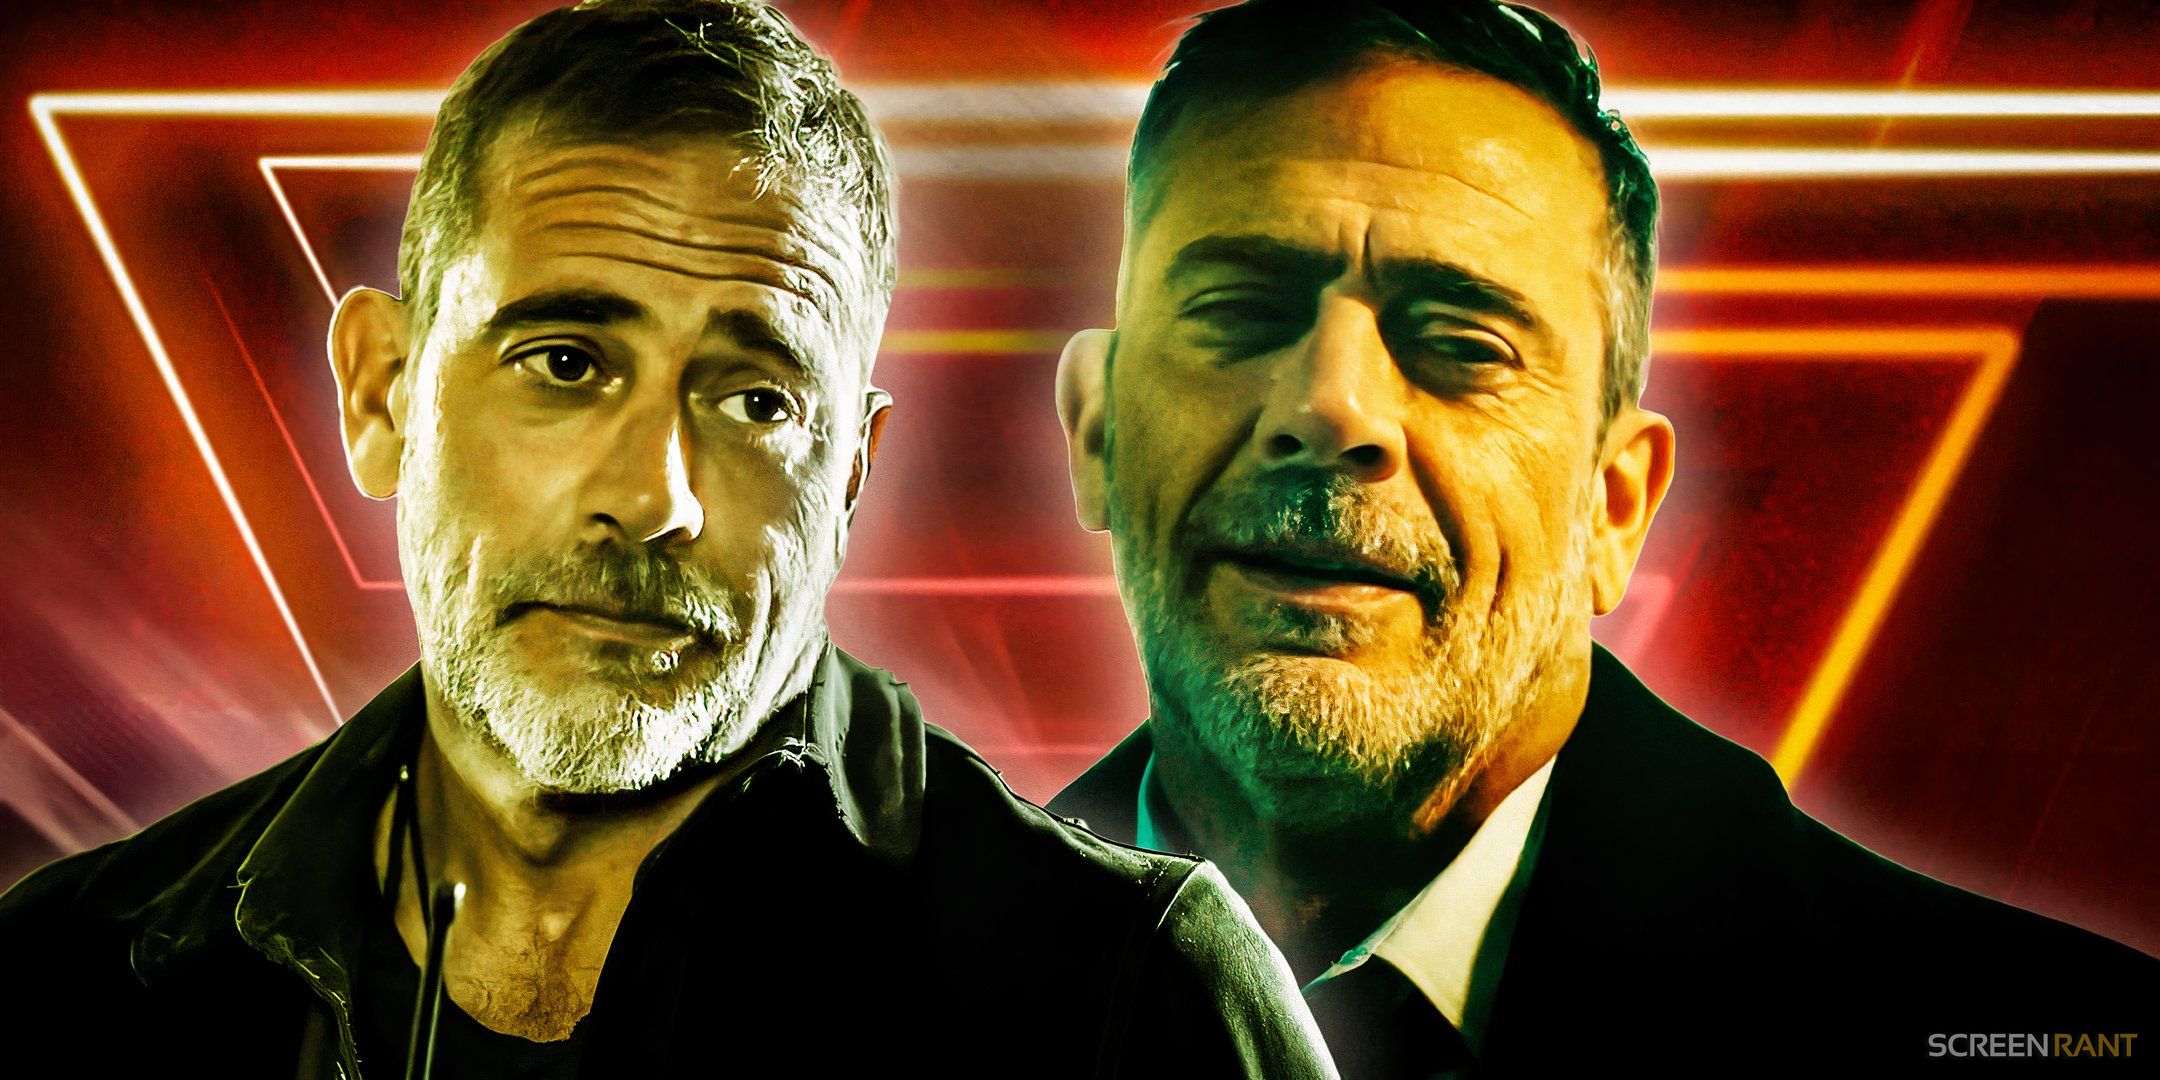 Jeffrey Dean Morgan’s character in season 4 of The Boys is virtually identical to his most famous role